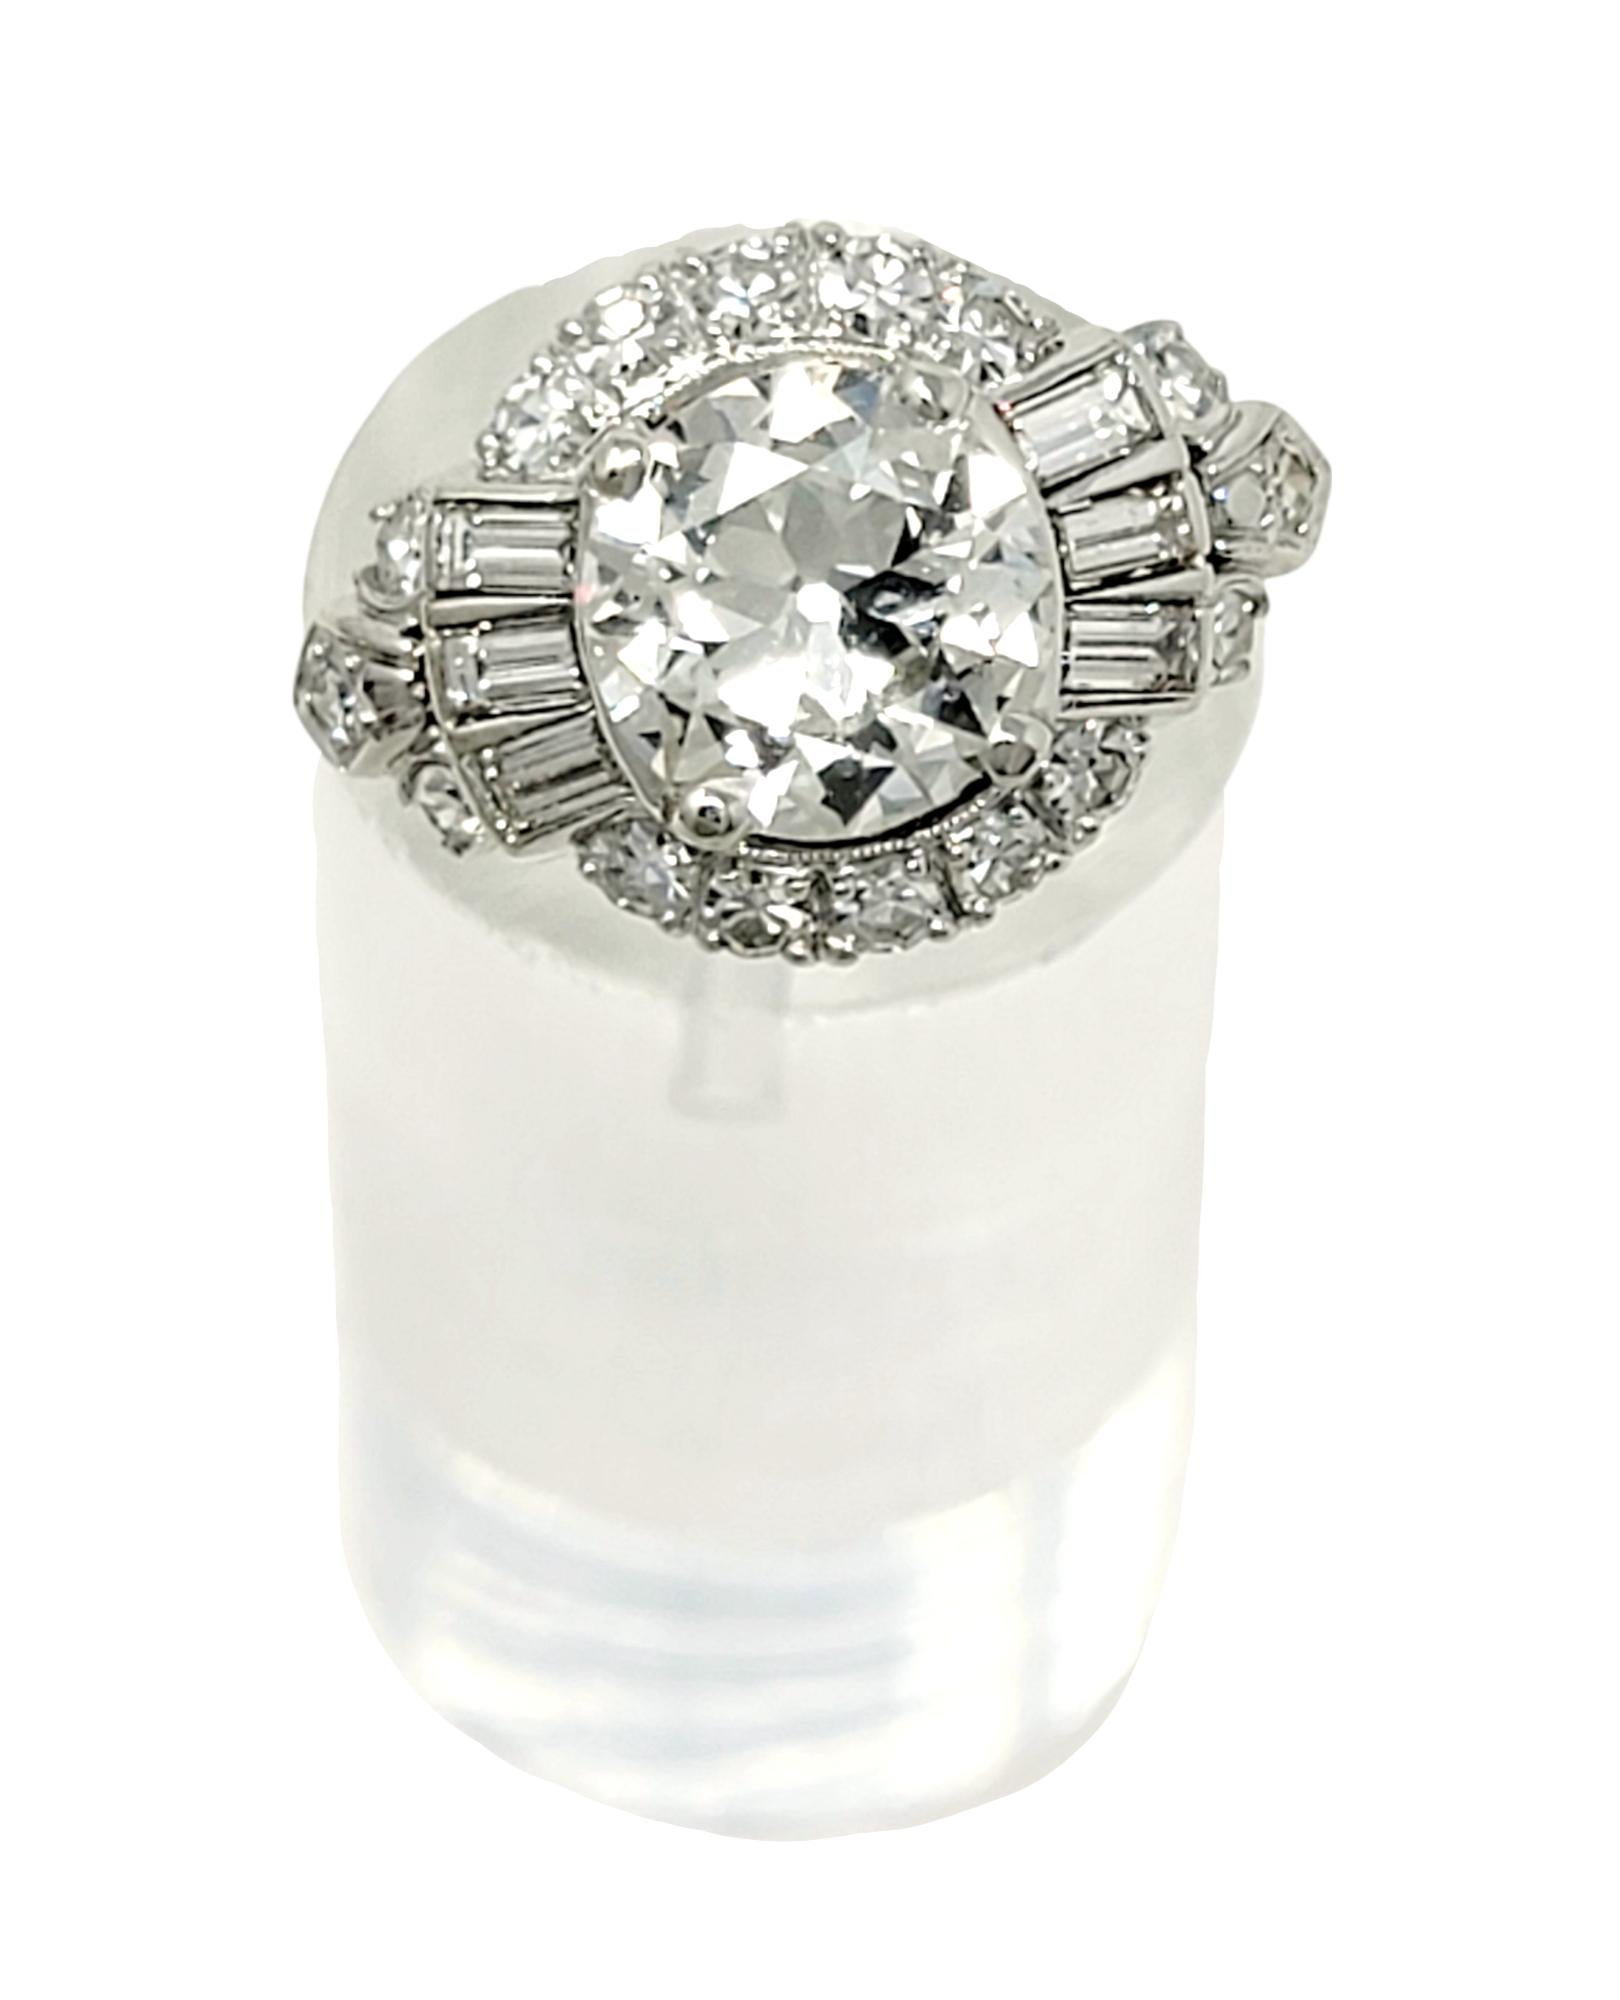 Ring size: 5.75

This stunning vintage diamond engagement ring will absolutely take your breath away. Exquisitely designed with multiple shapes of diamonds in a luxurious platinum setting, this is truly an undeniably unique piece that you will